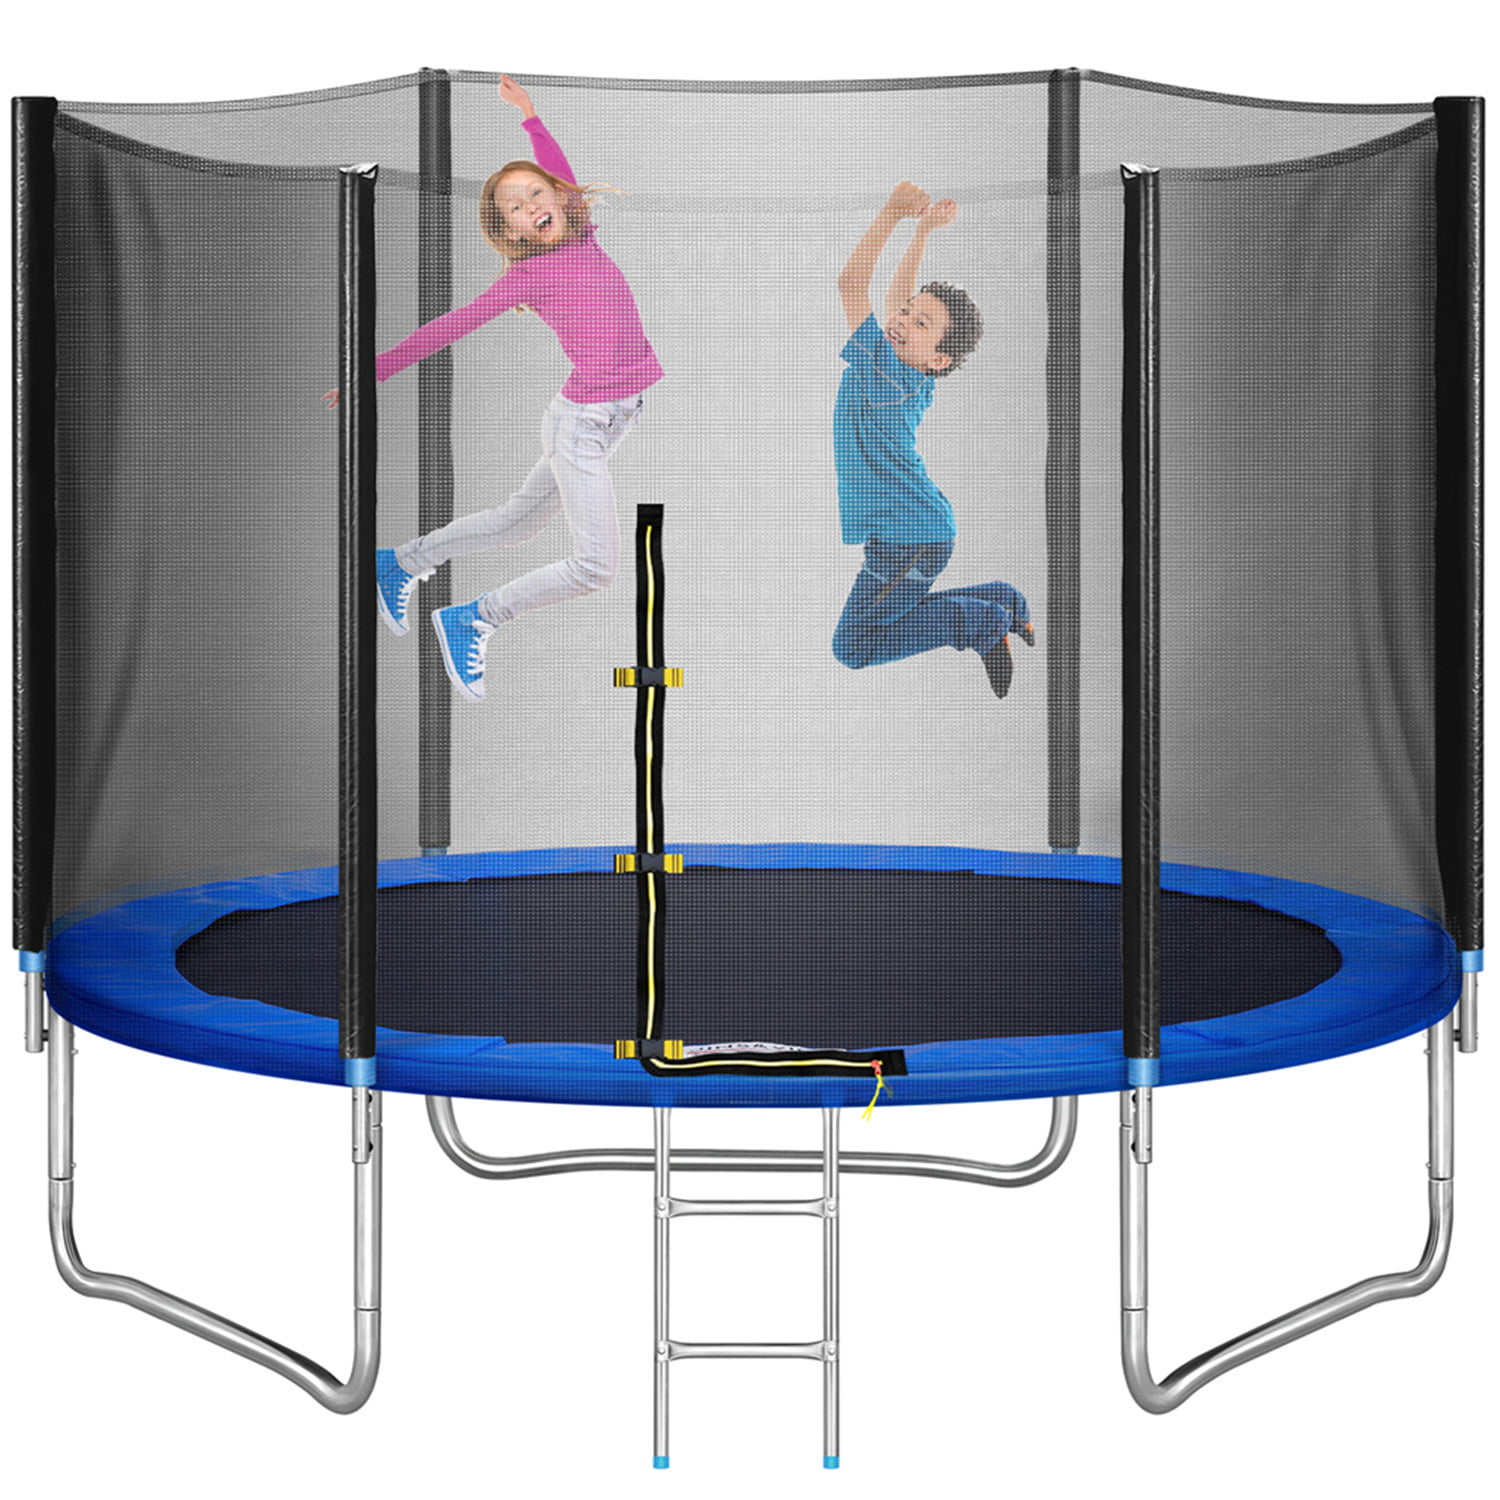 Skywalker Trampoline Accessory Game Kit with Ladder Free Shipping 47-Inch 